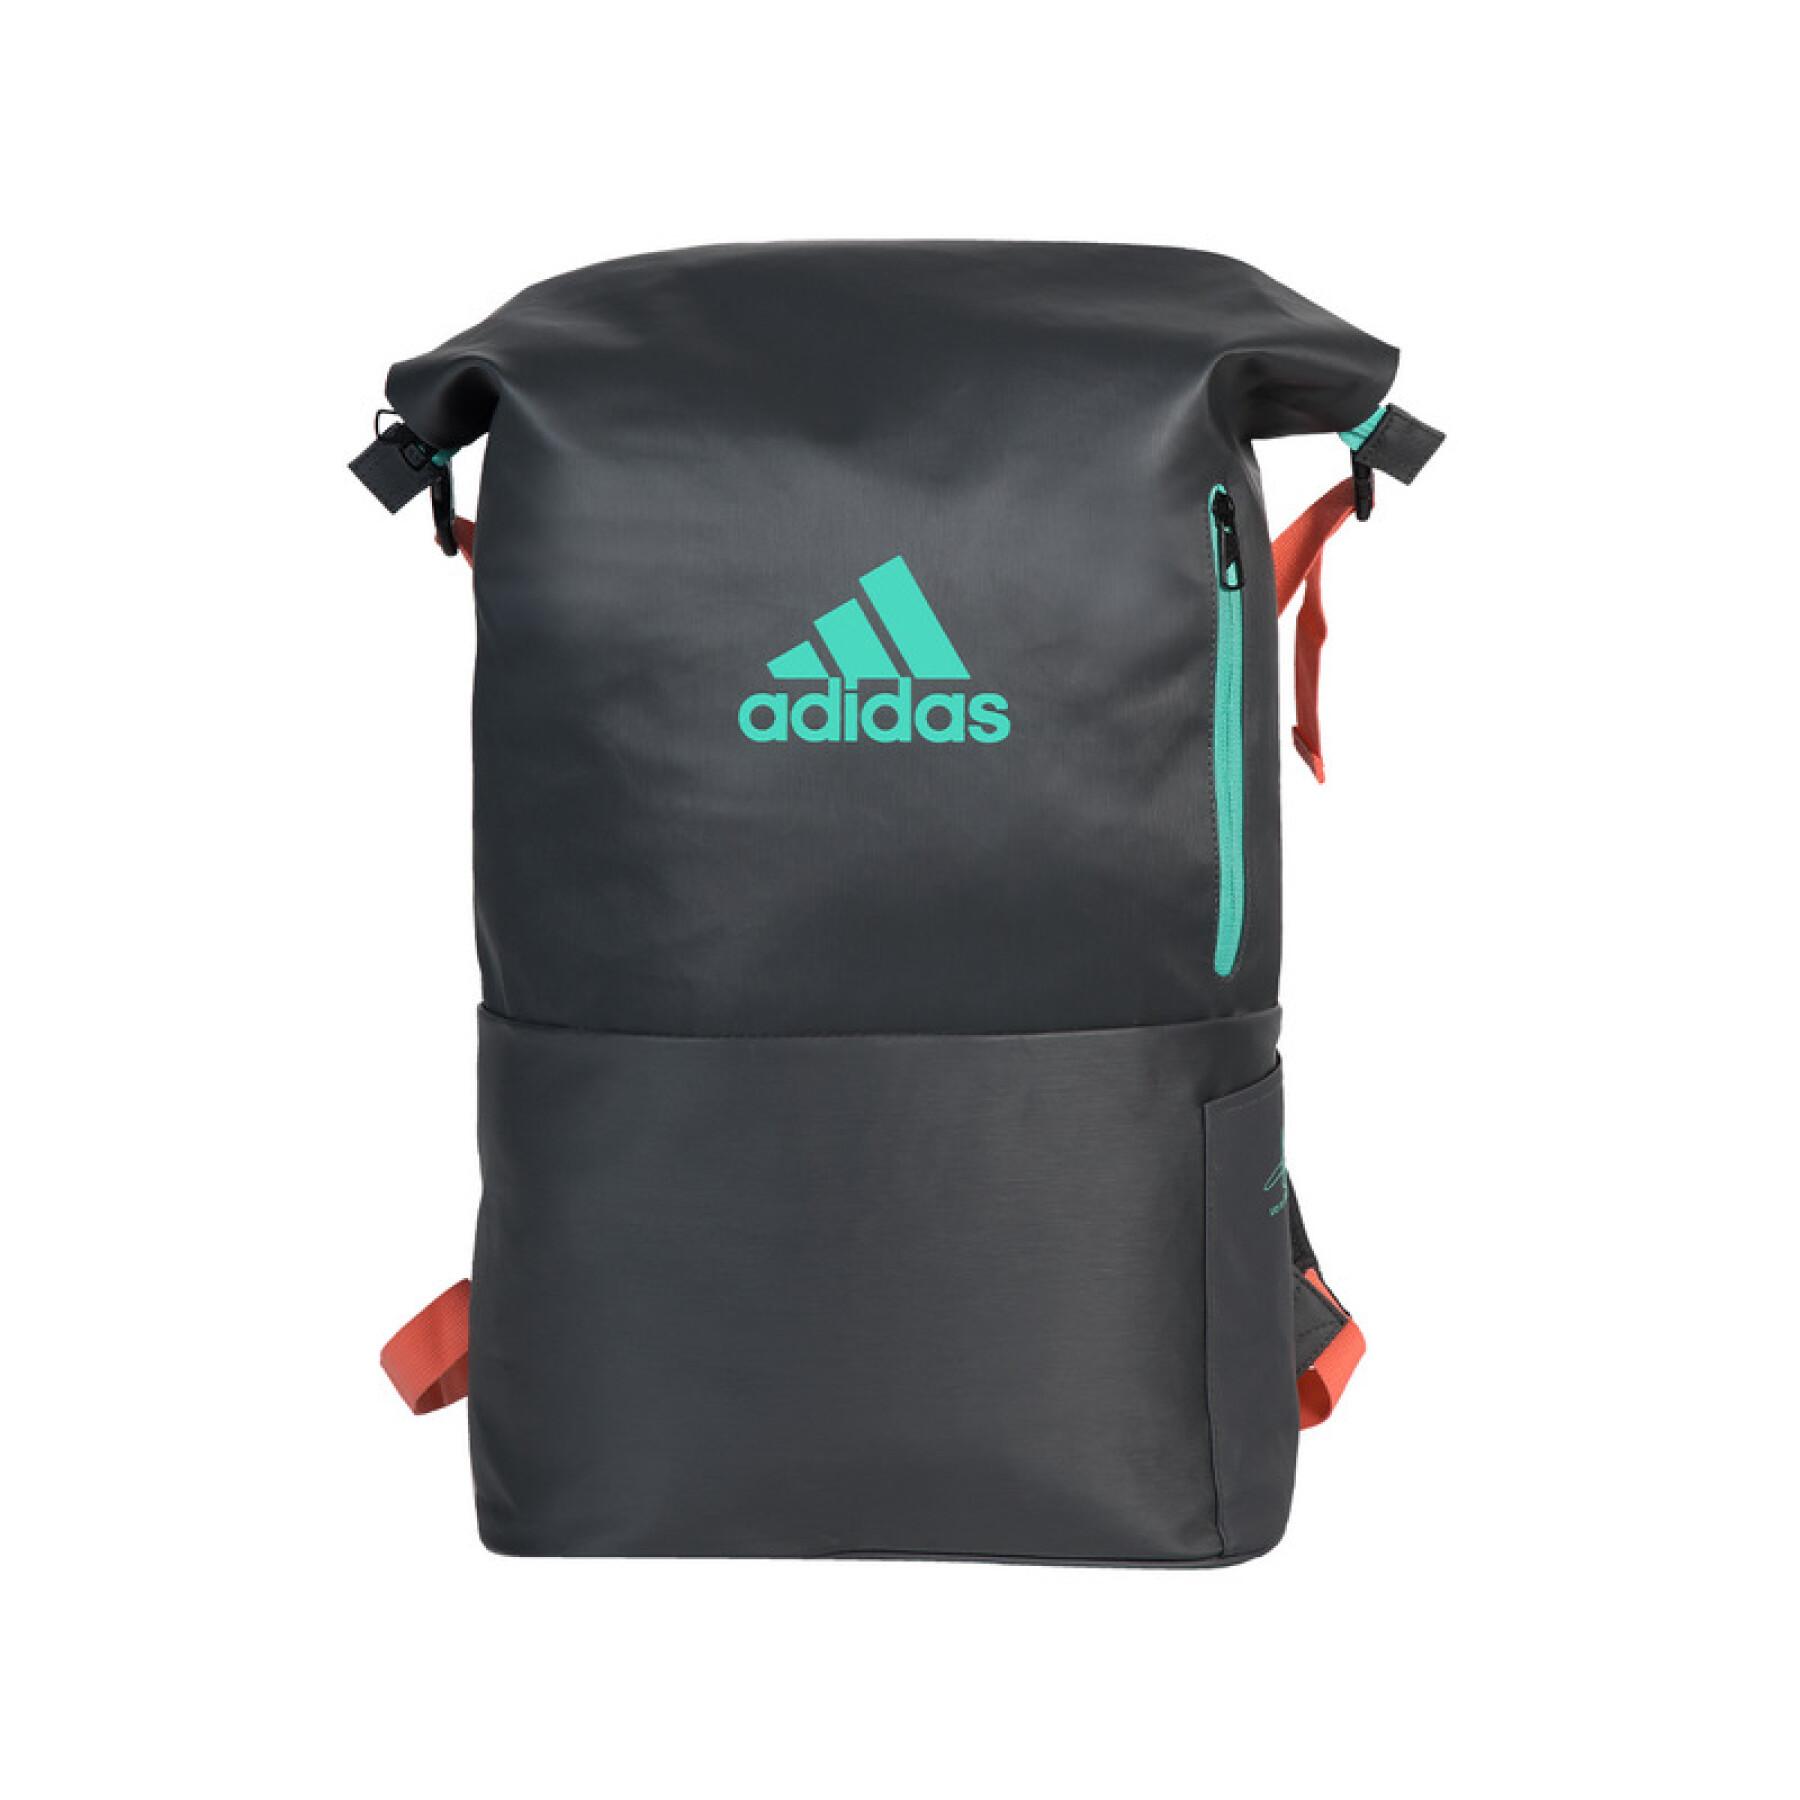 Backpack adidas Multigame